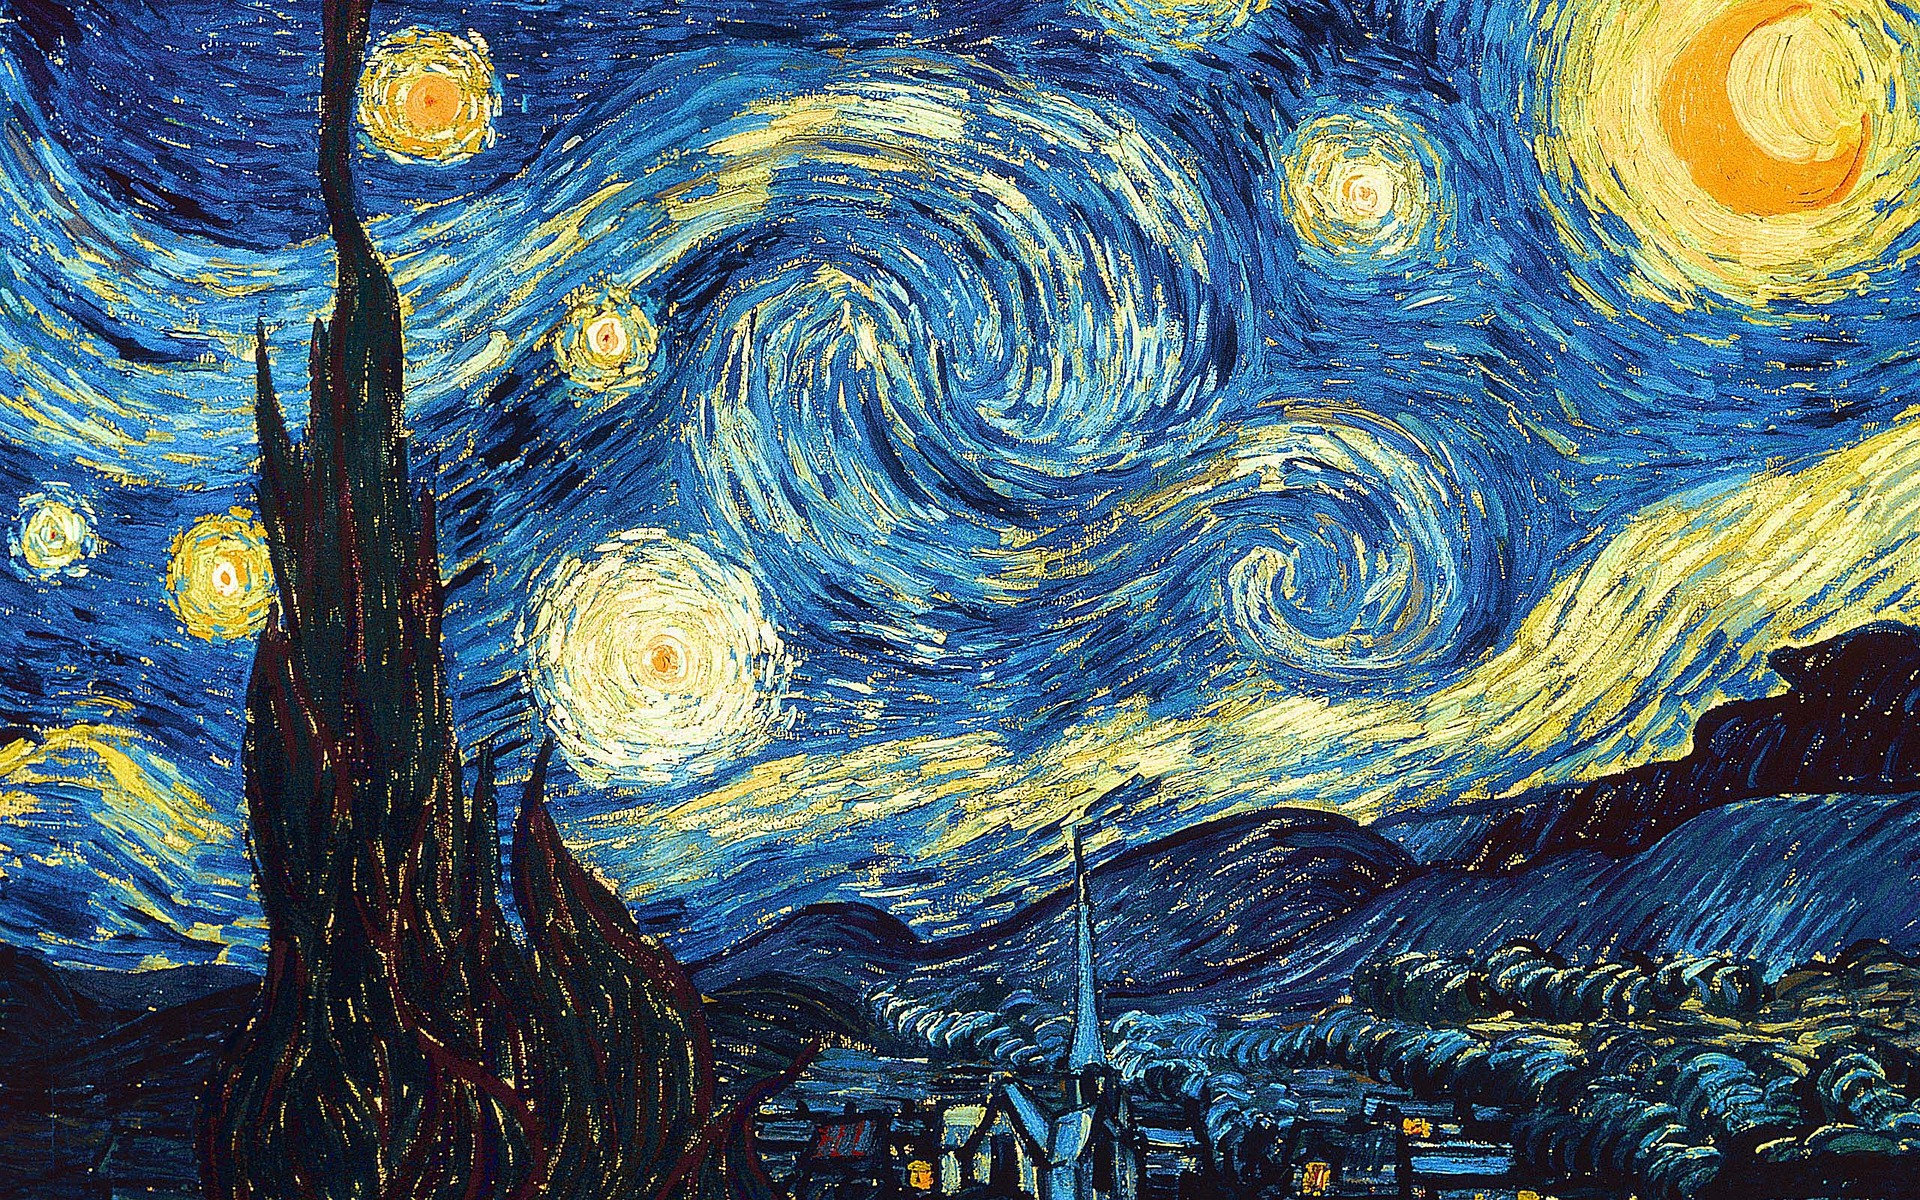 Starry Night by Van Gogh thanks to Pixabay